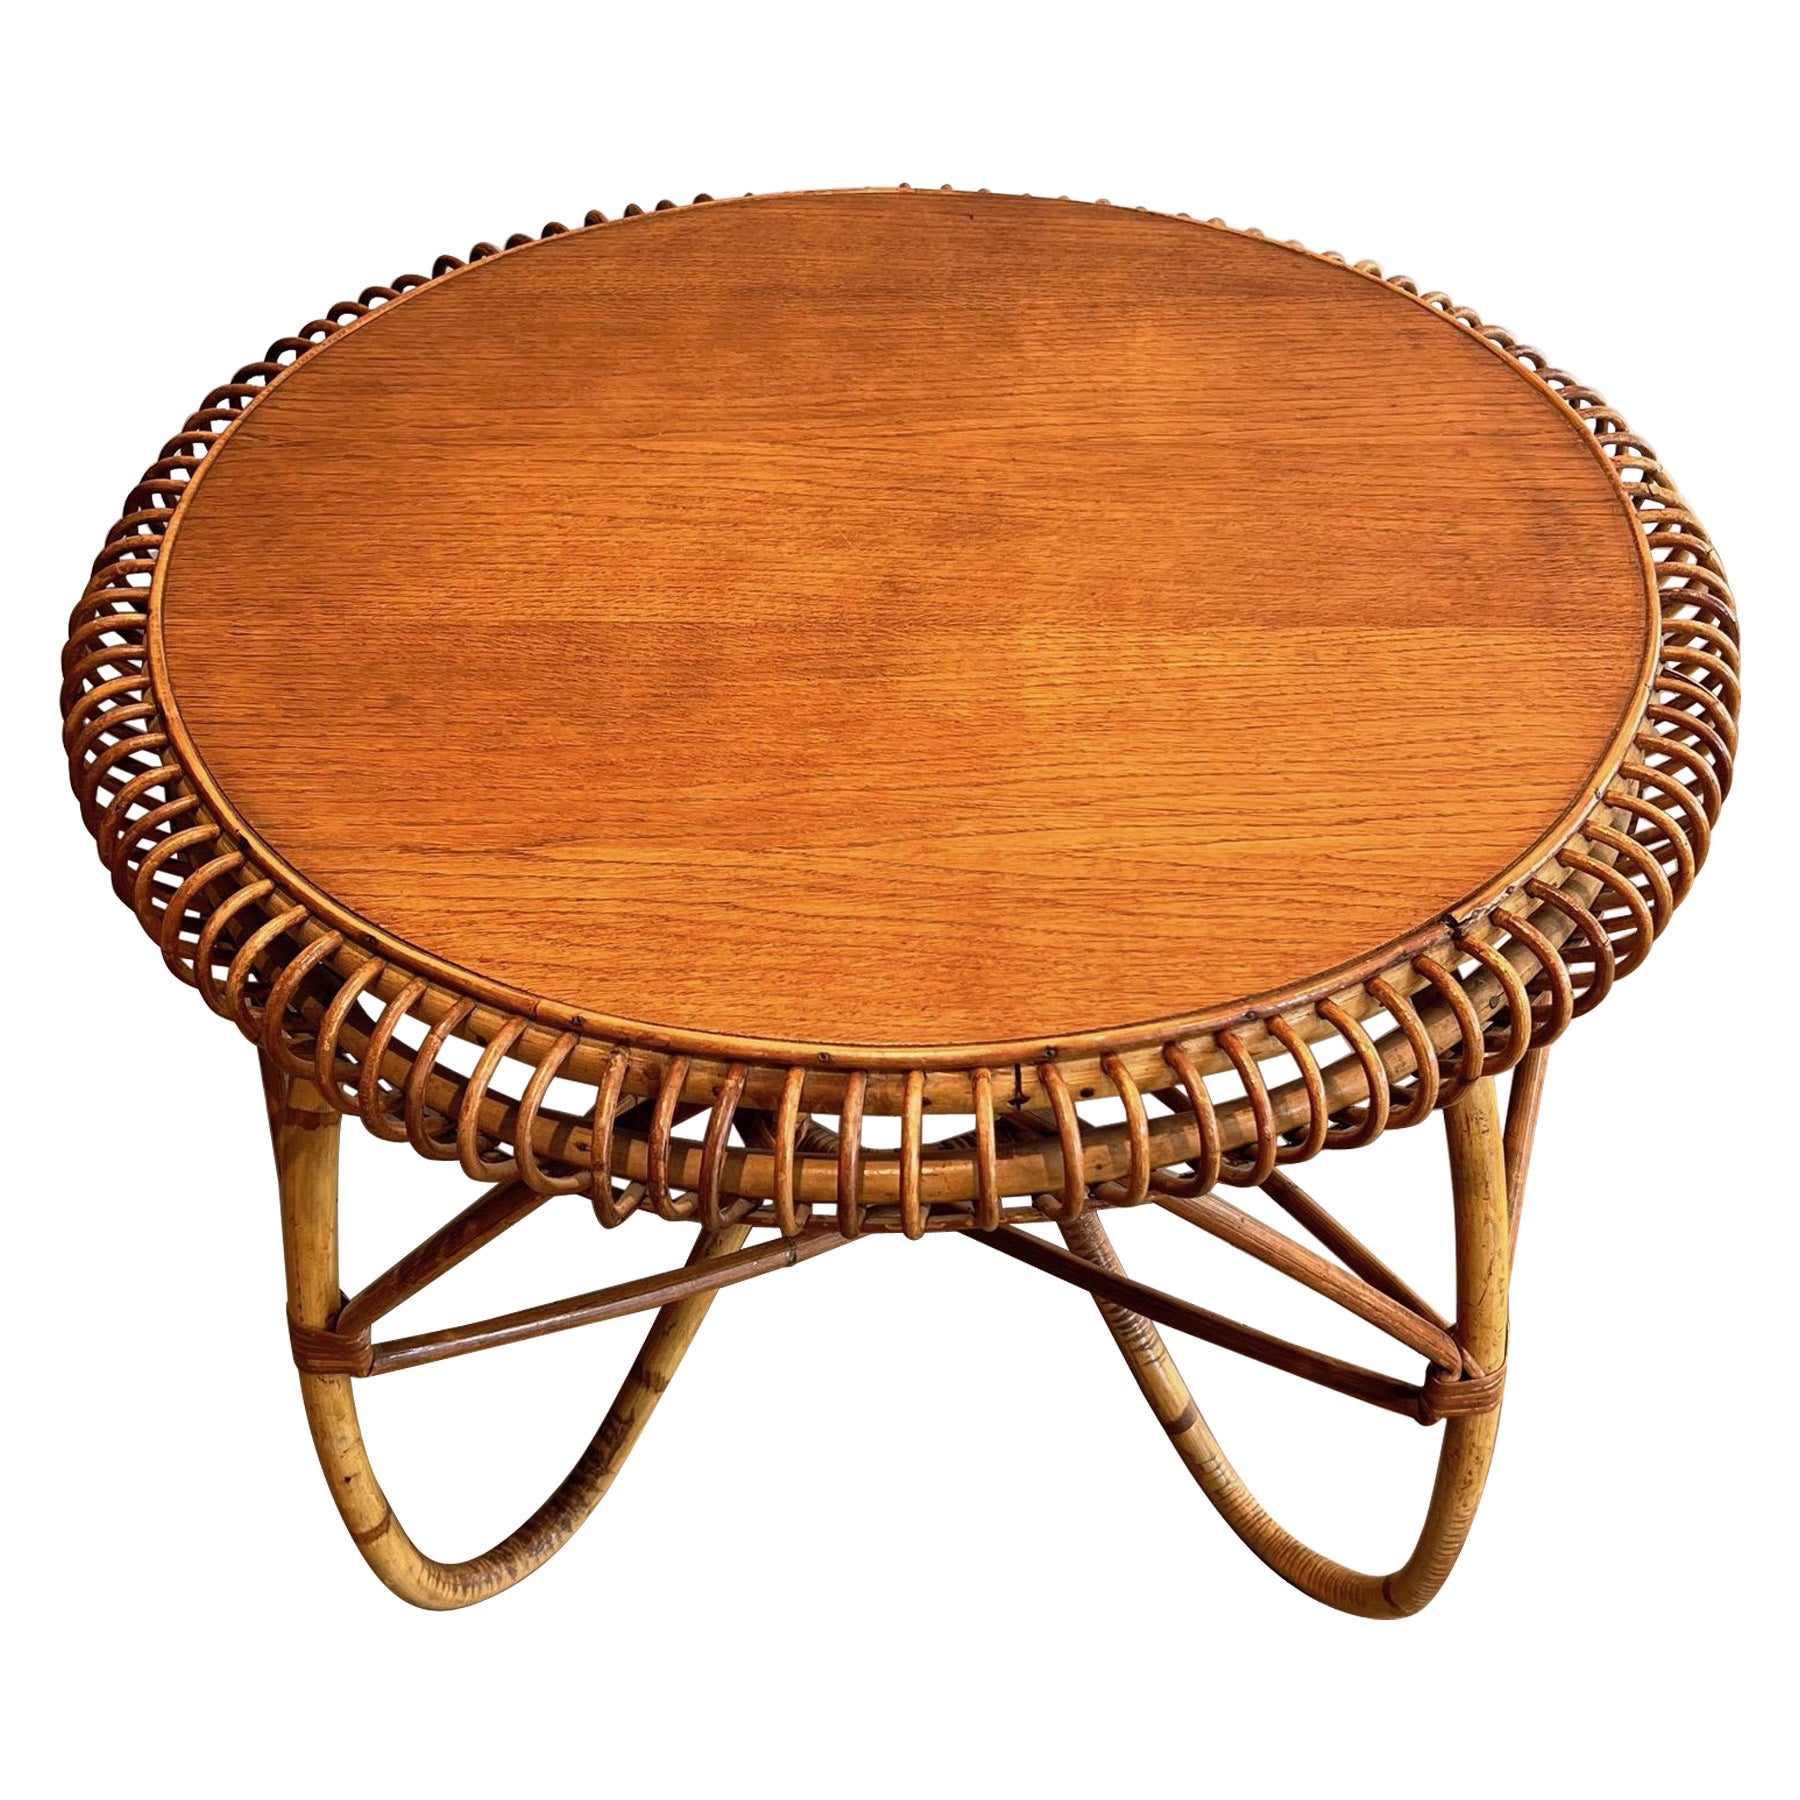 Round Rattan and Wood Coffee Table. Italian Work in the Style of Franco Albini